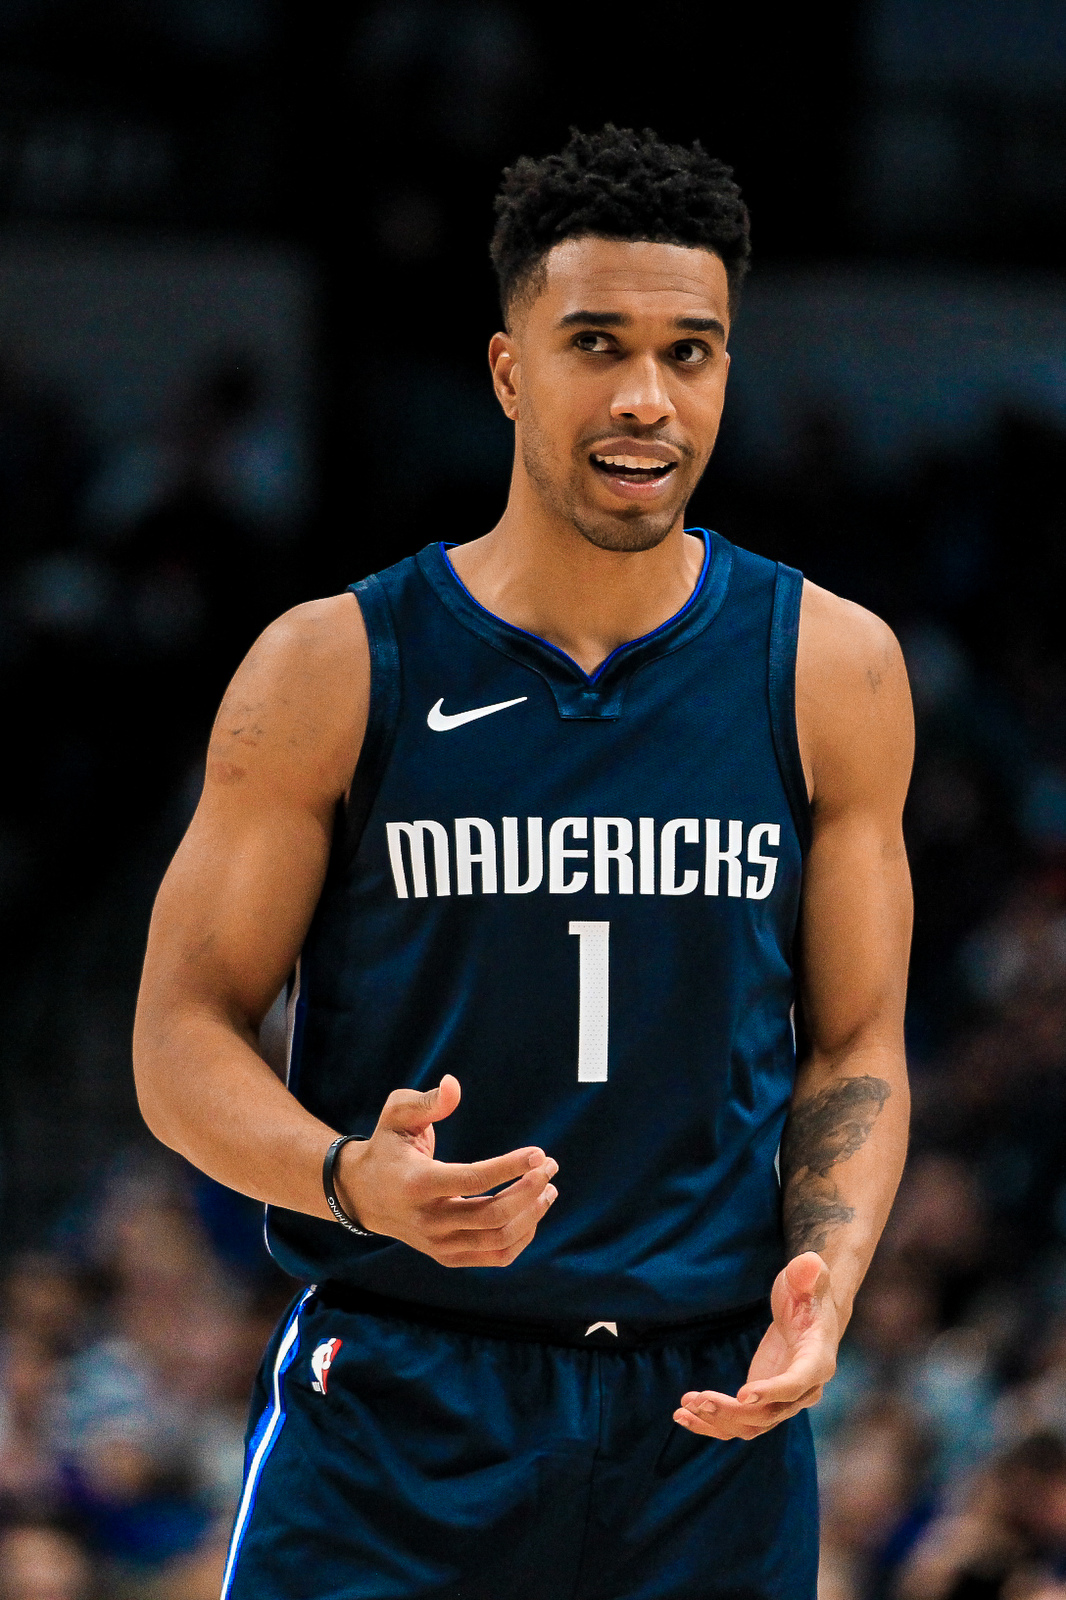 Courtney Lee - The Official Home of the 